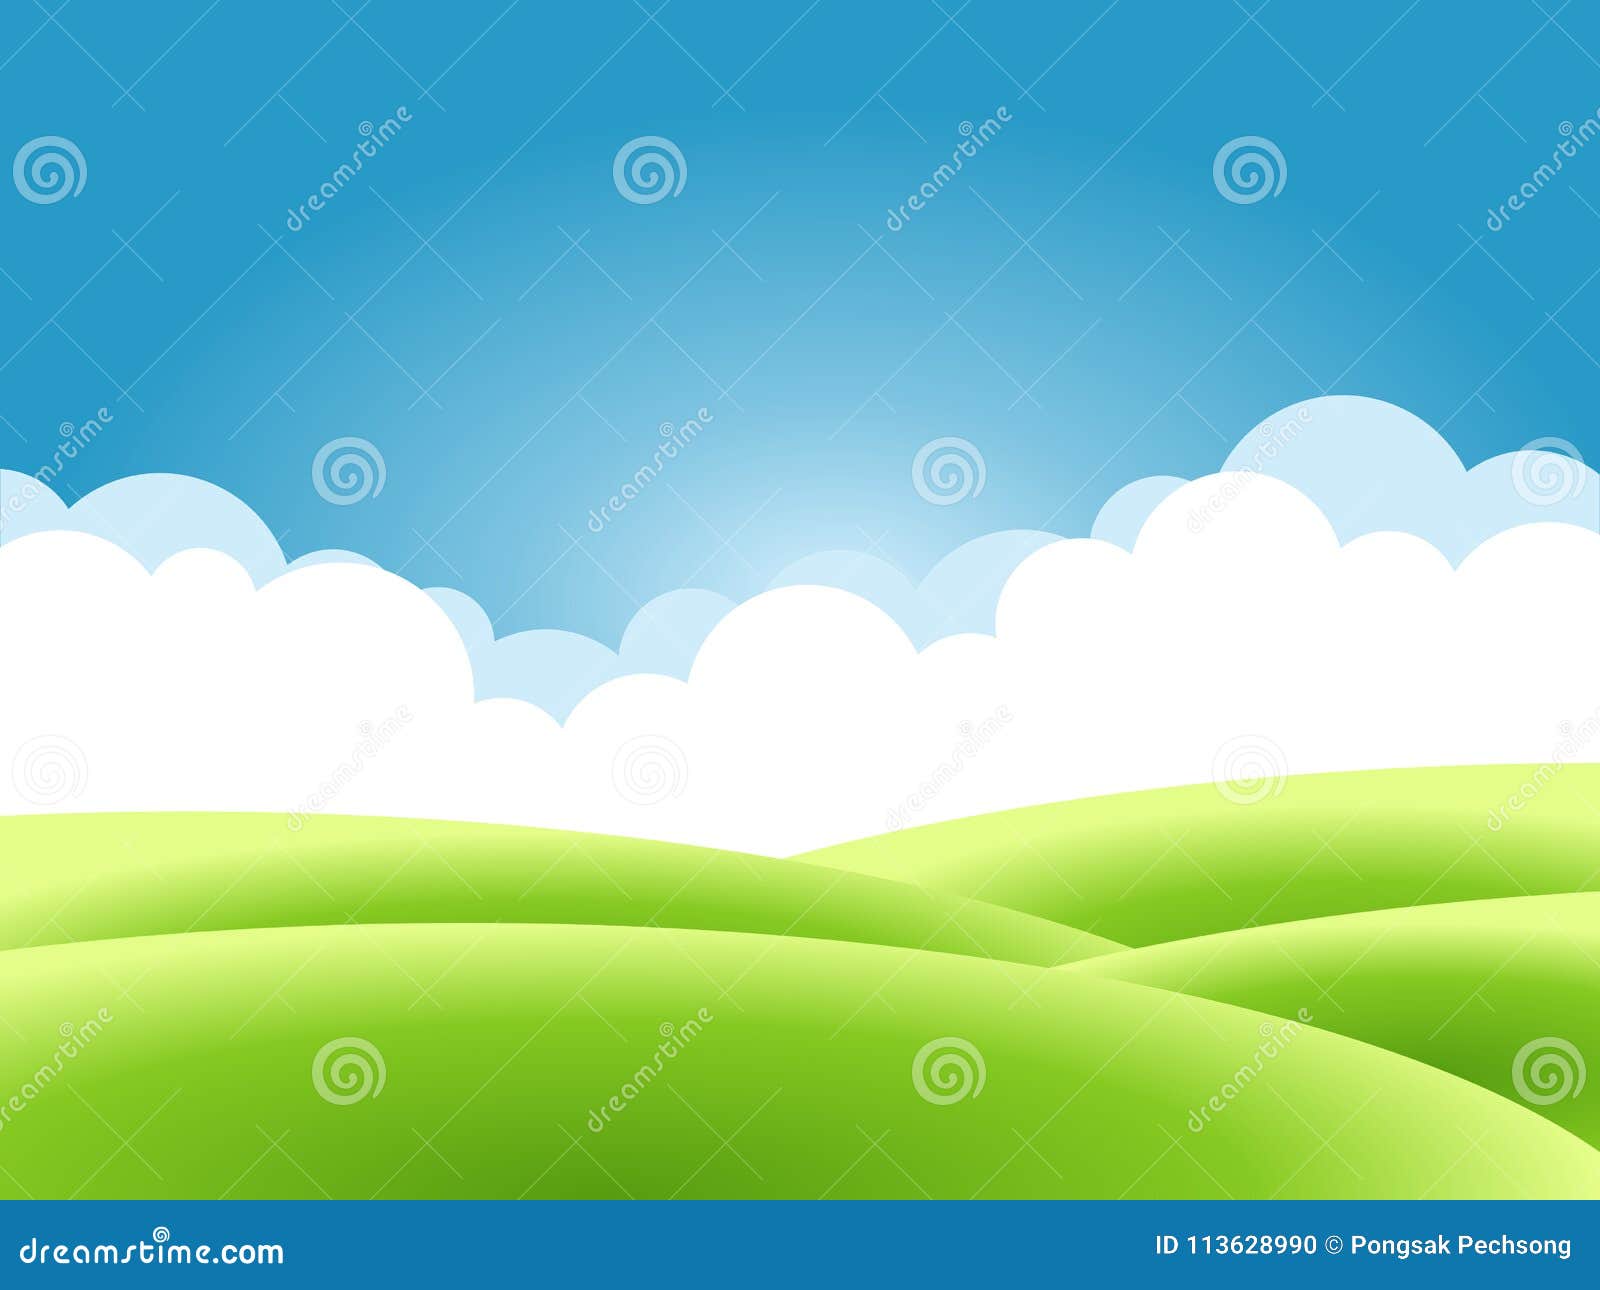 summer nature background, a landscape with green hills and meadows, blue sky and clouds.